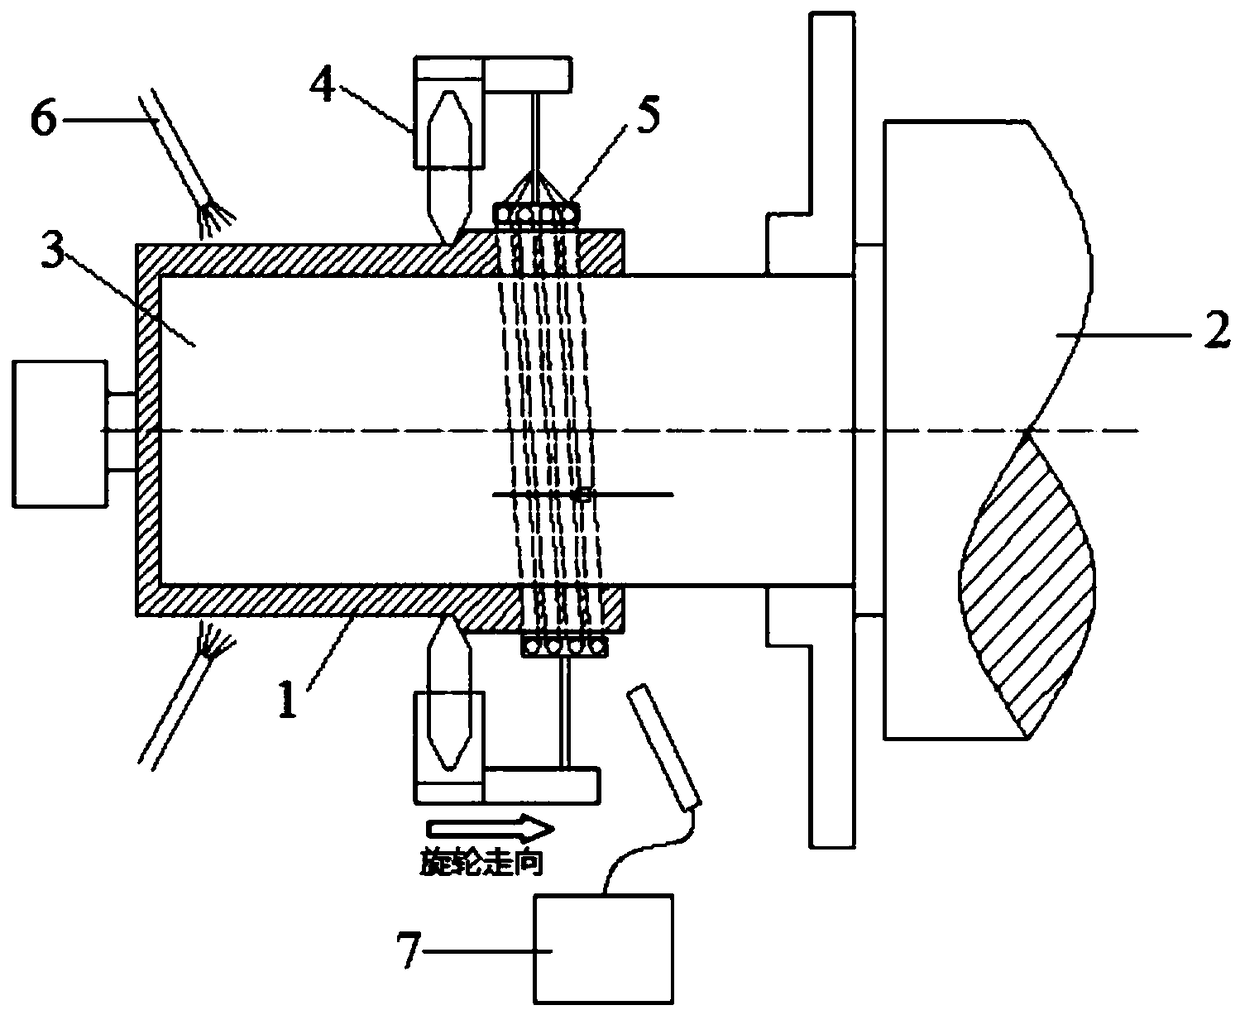 Titanium-based alloy material spinning forming method based on composite heating